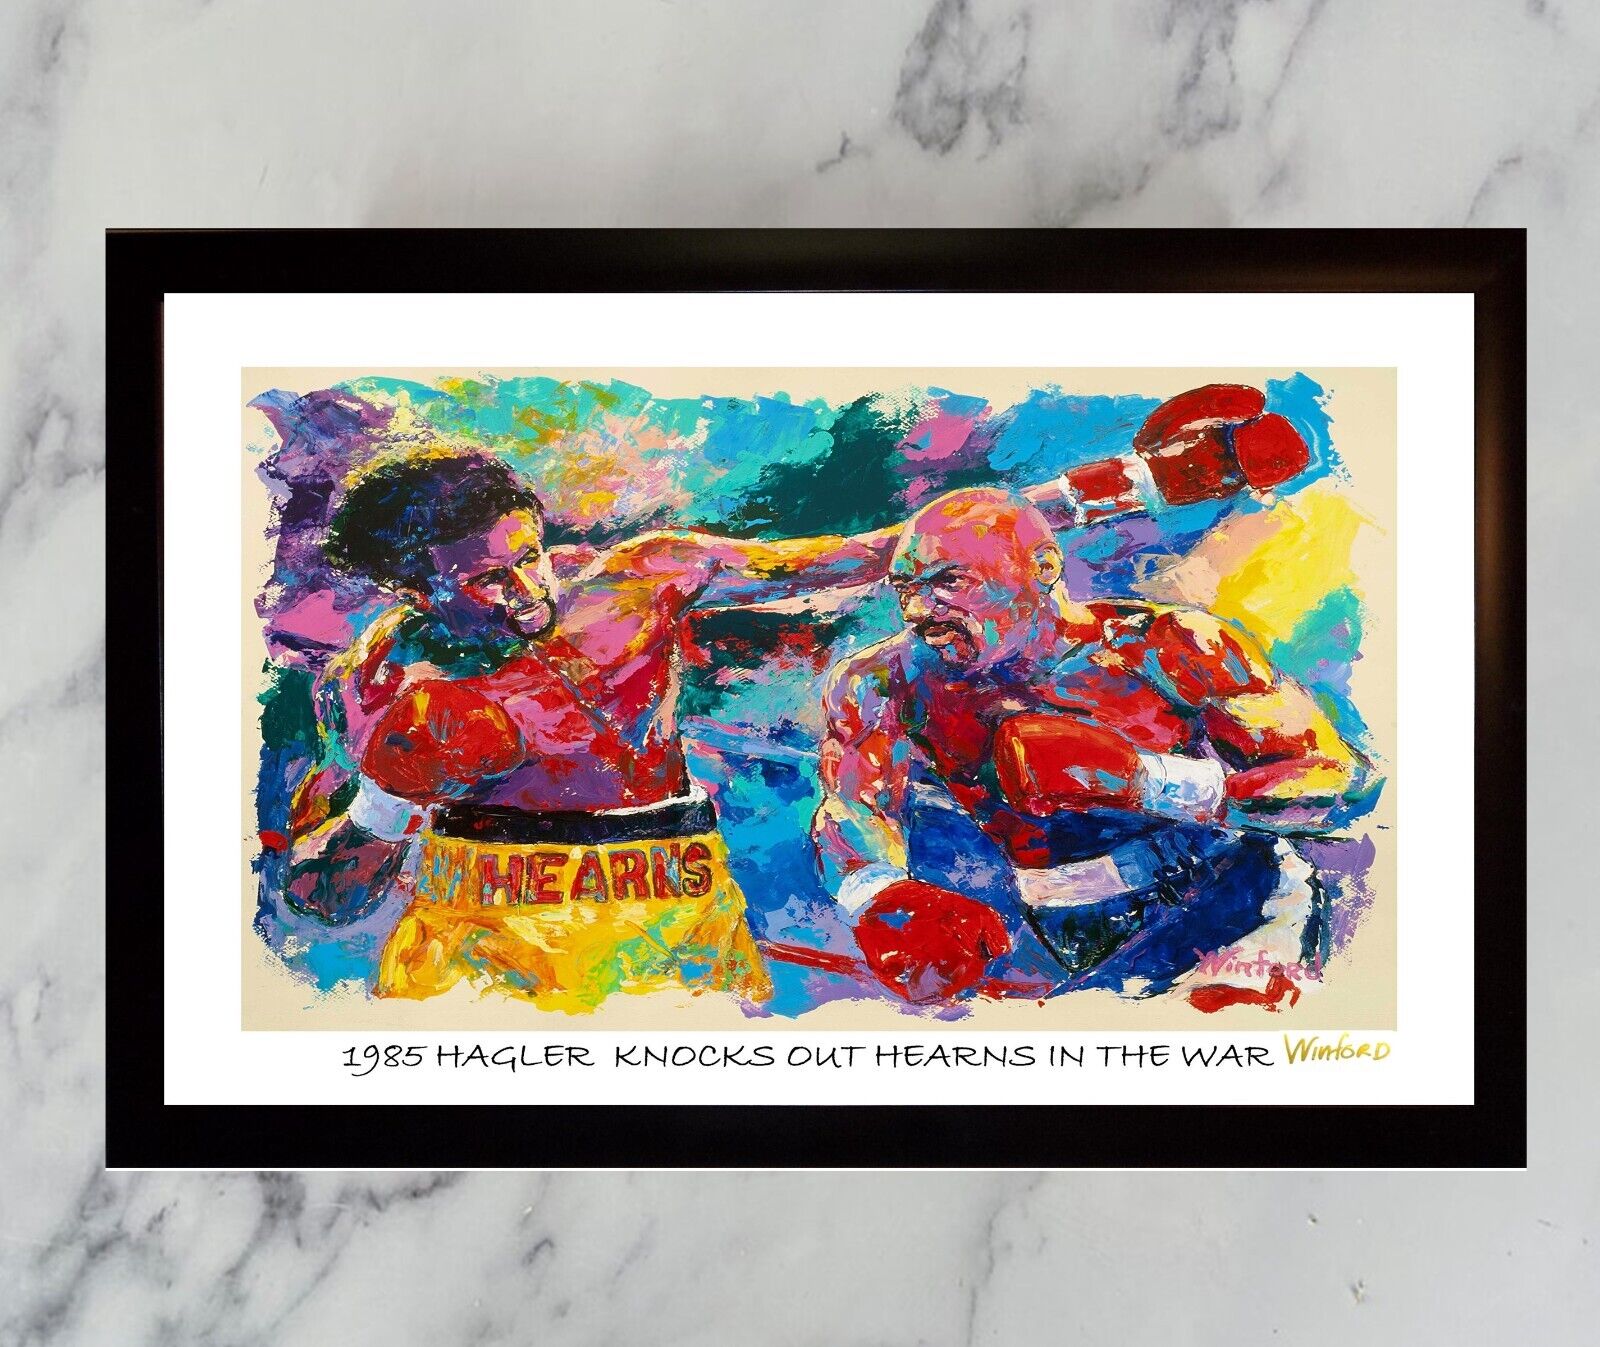 Sale MARVIN HAGLER TOMMY HEARNS Premium Art Print Winford Was 129.95 Now 89.95